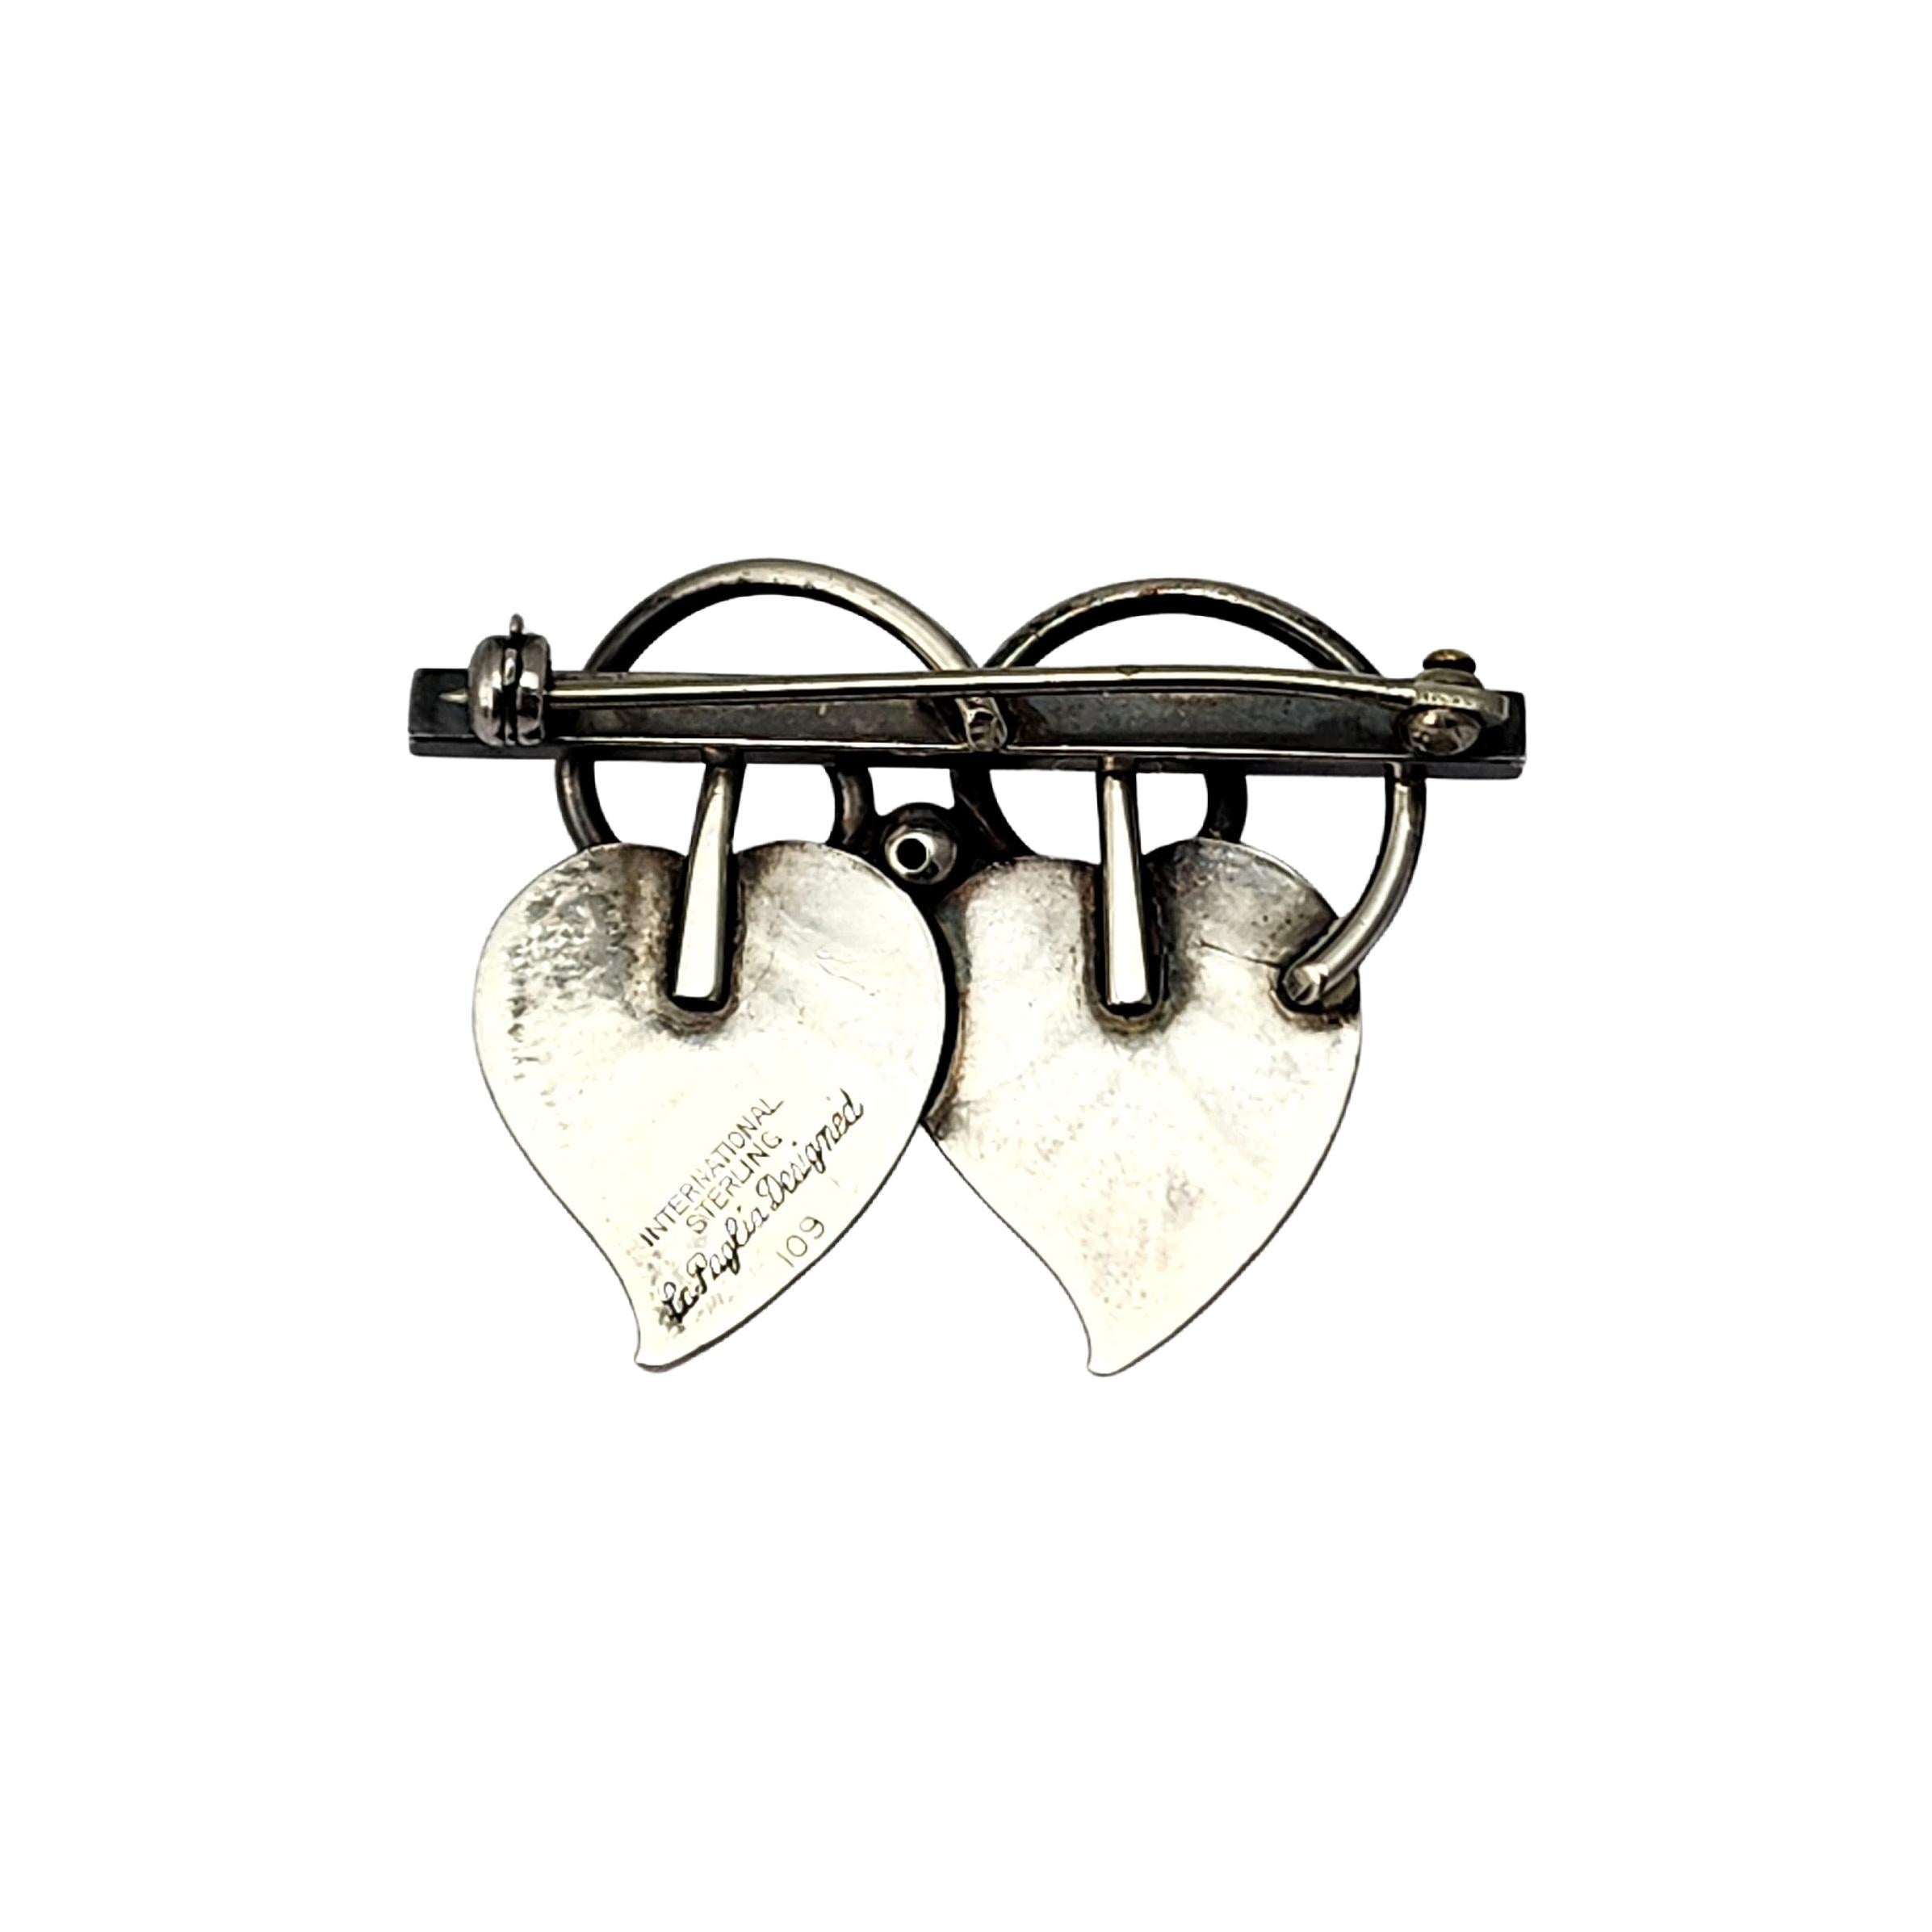 Vintage sterling silver double leaf pin/brooch designed by La Paglia for International Sterling, pattern #109.

This pin features 2 leaves detailed with black oxidized veins on a horizontal bar with swirl and bead accents..

Measures approx 1 3/4